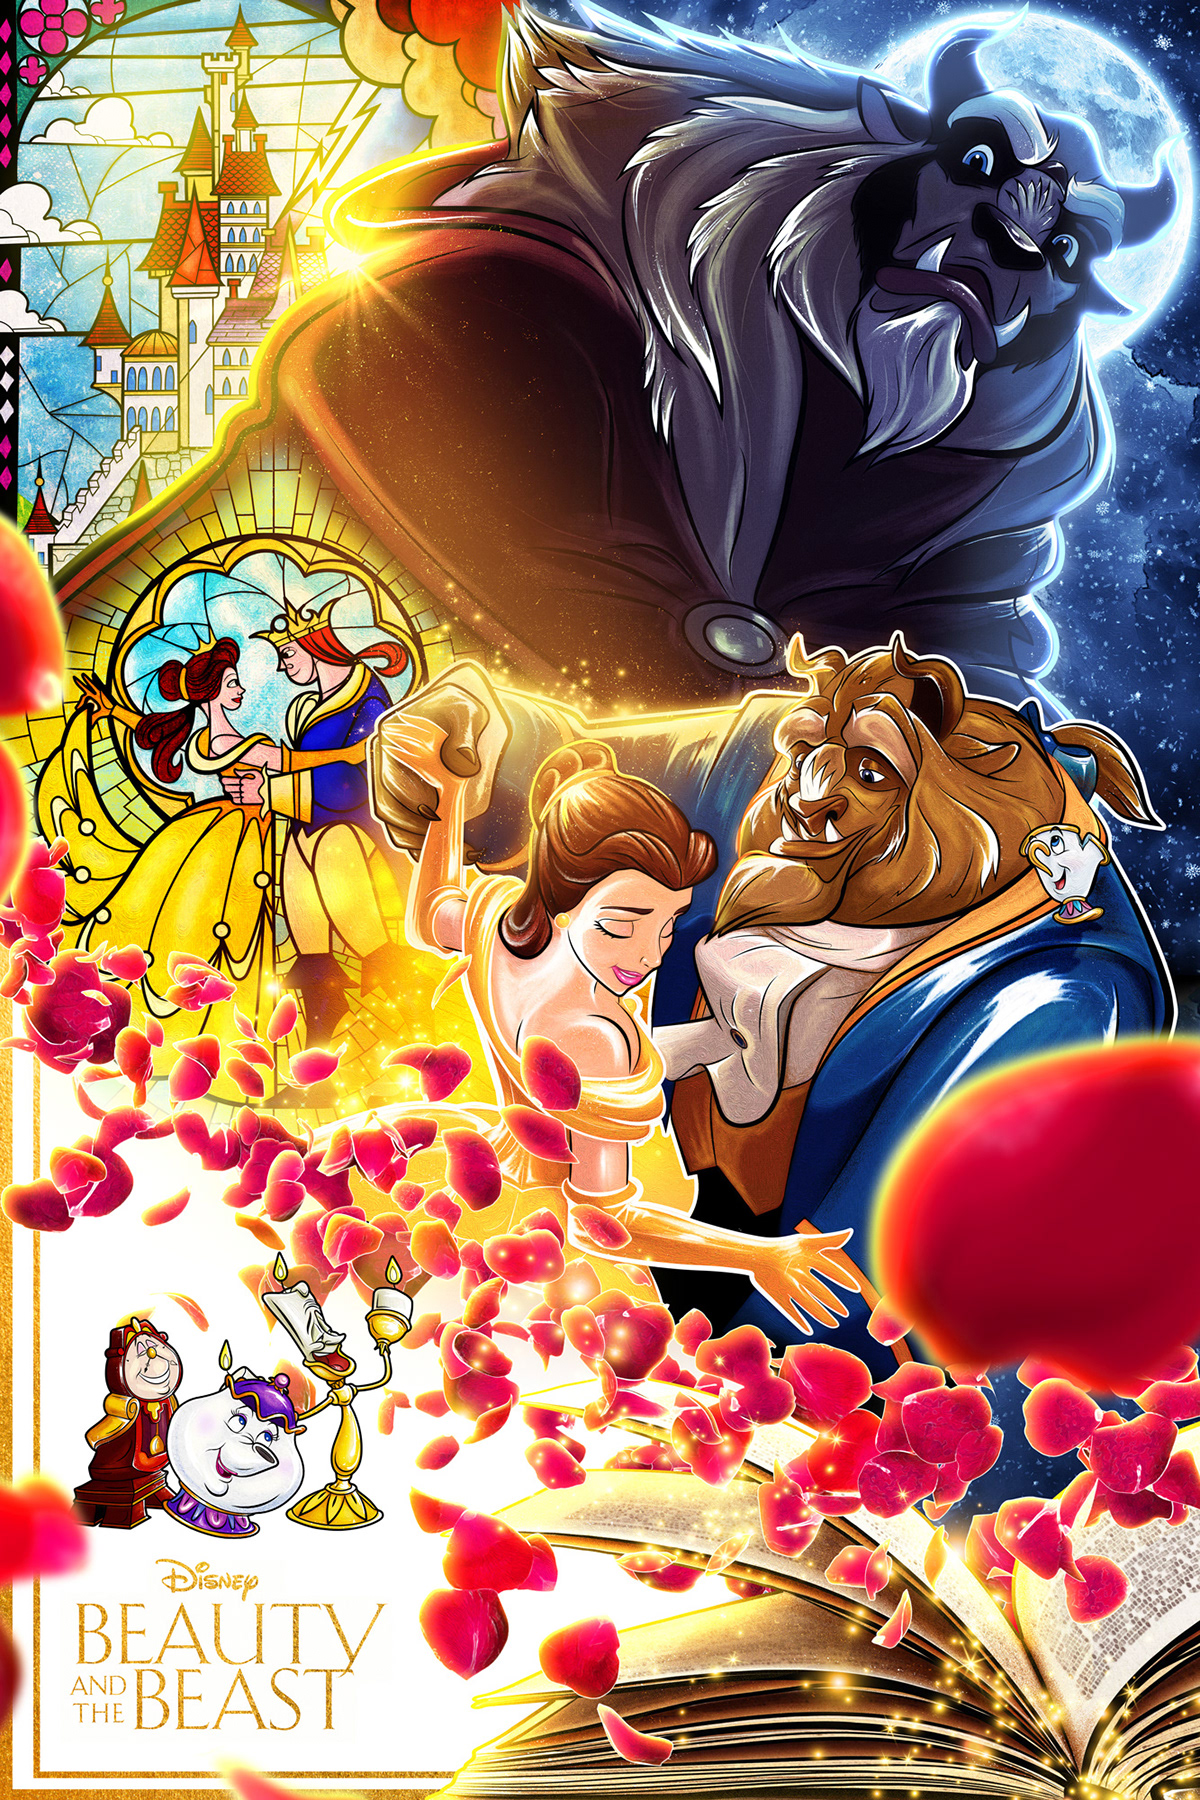 Beauty and the Beast Belle Lumière Cogsworth, Lumiere Beauty and